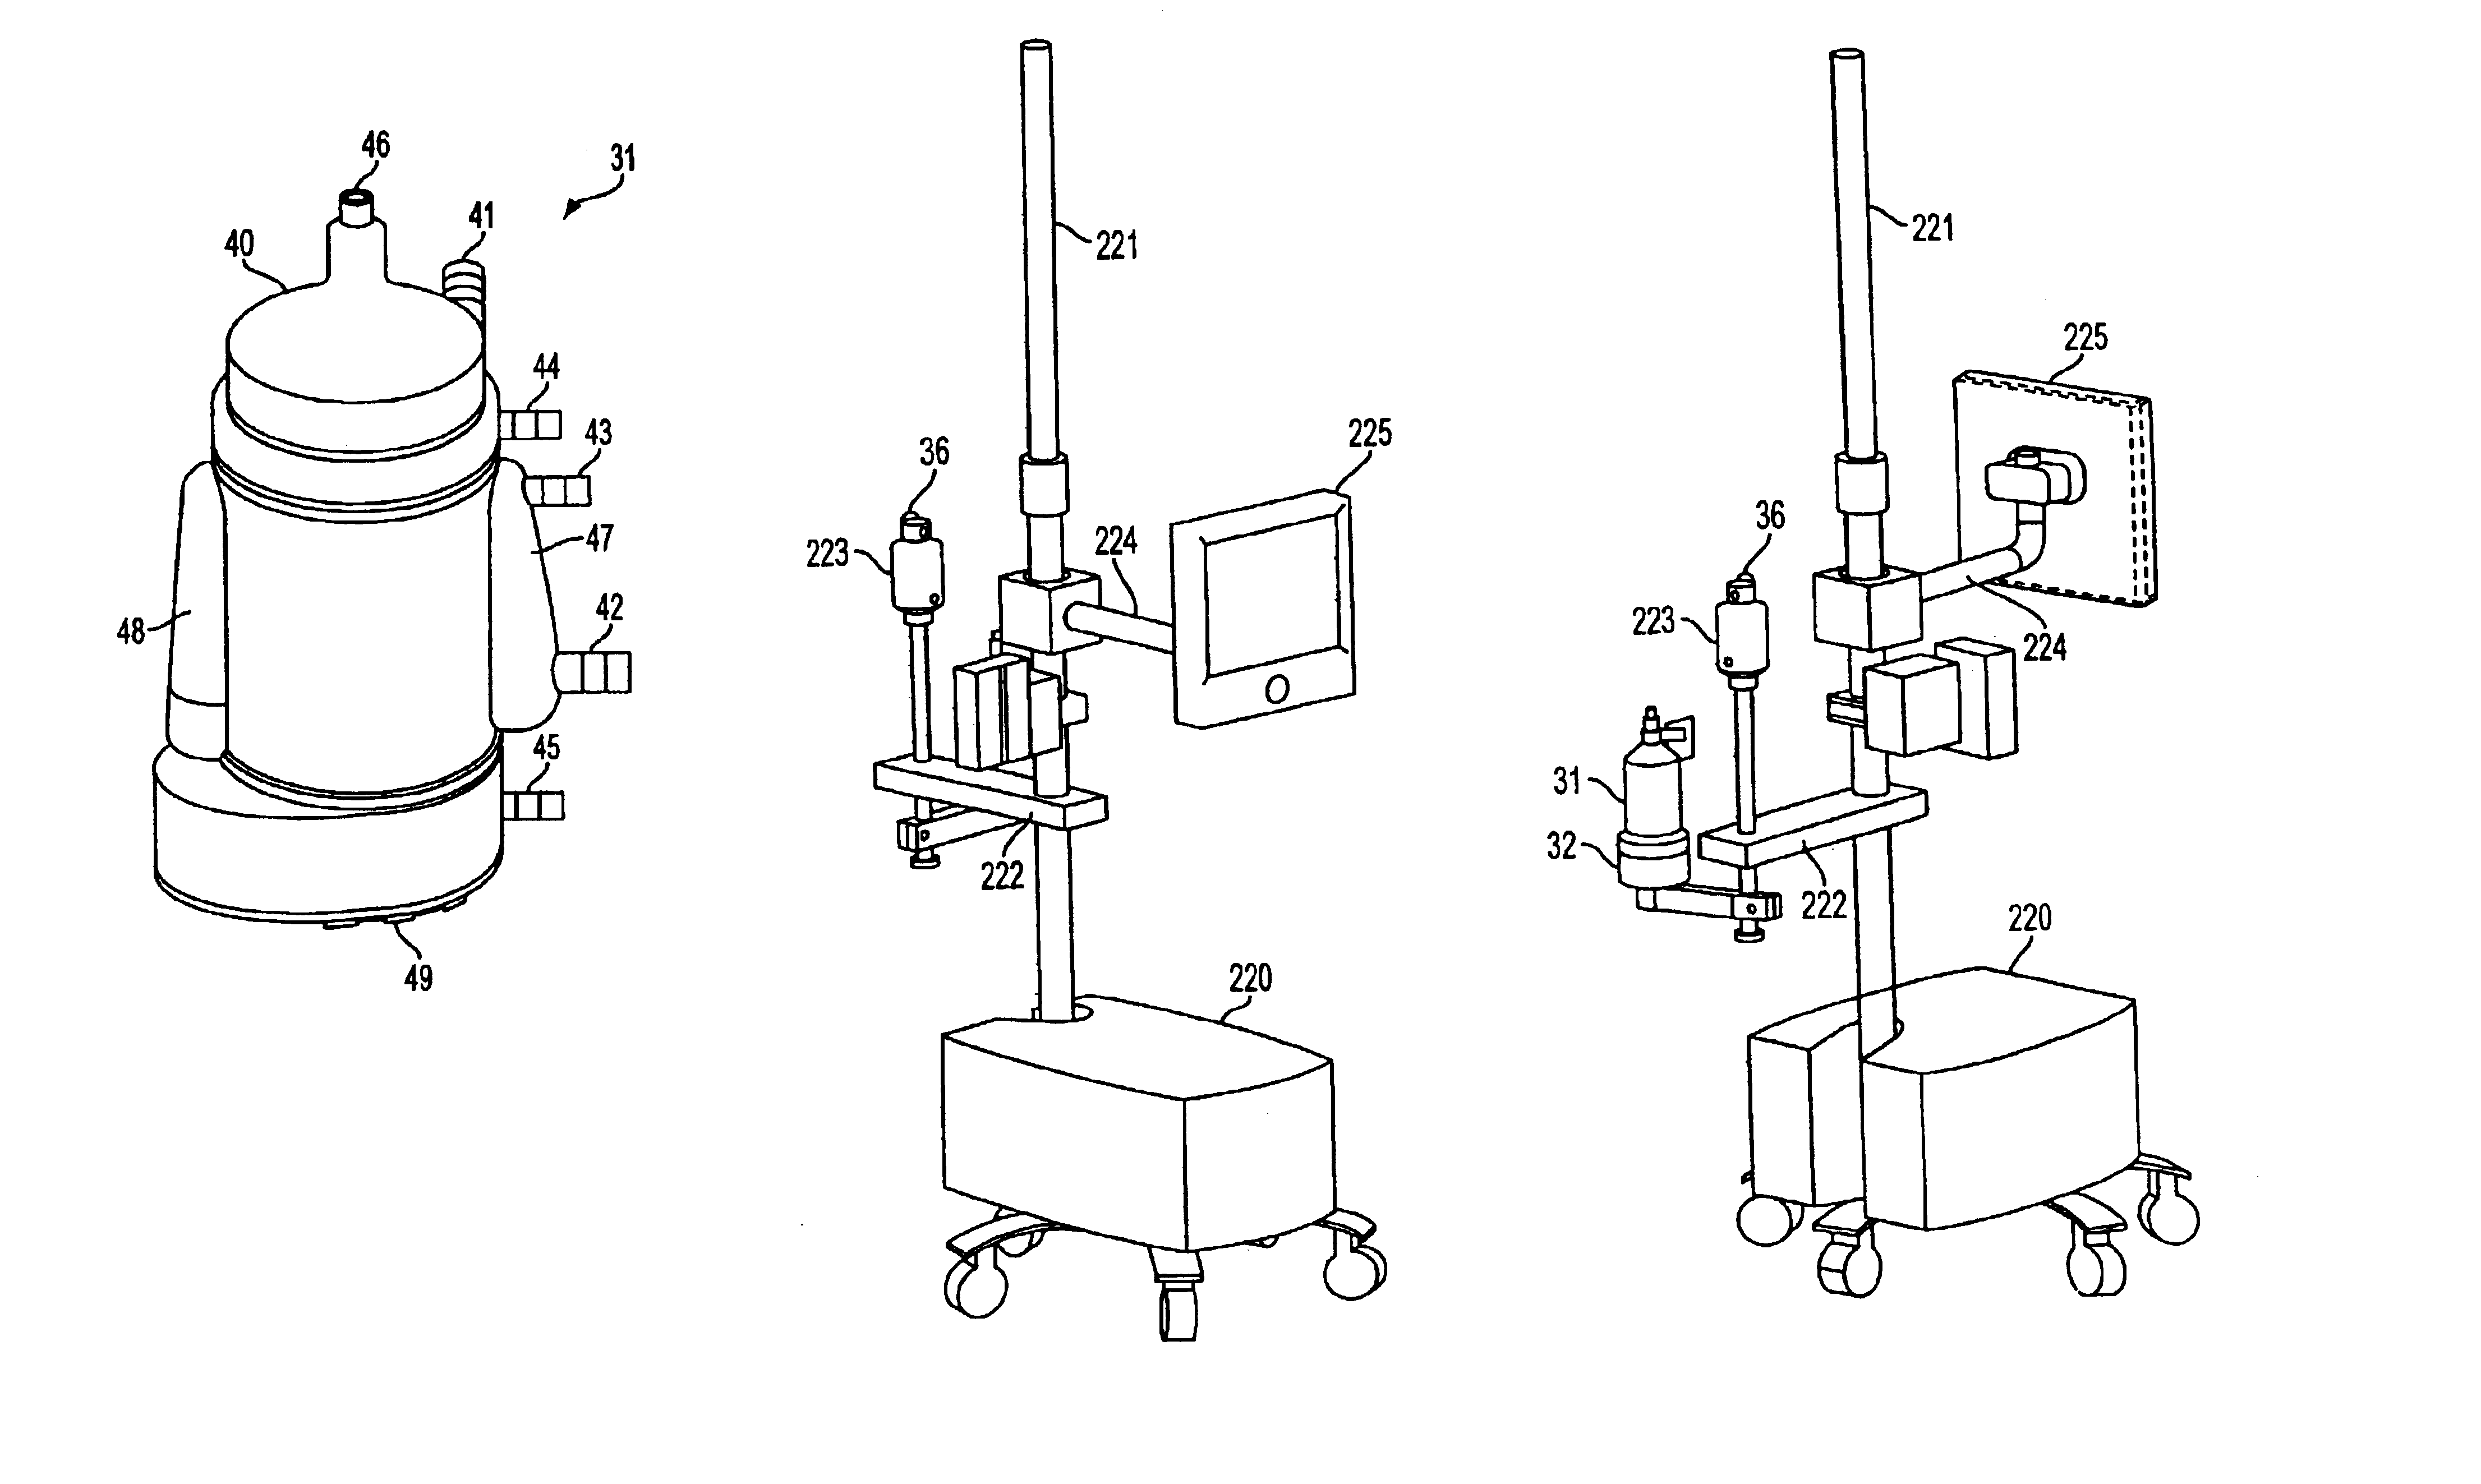 Integrated blood handling system having active gas removal system and methods of use